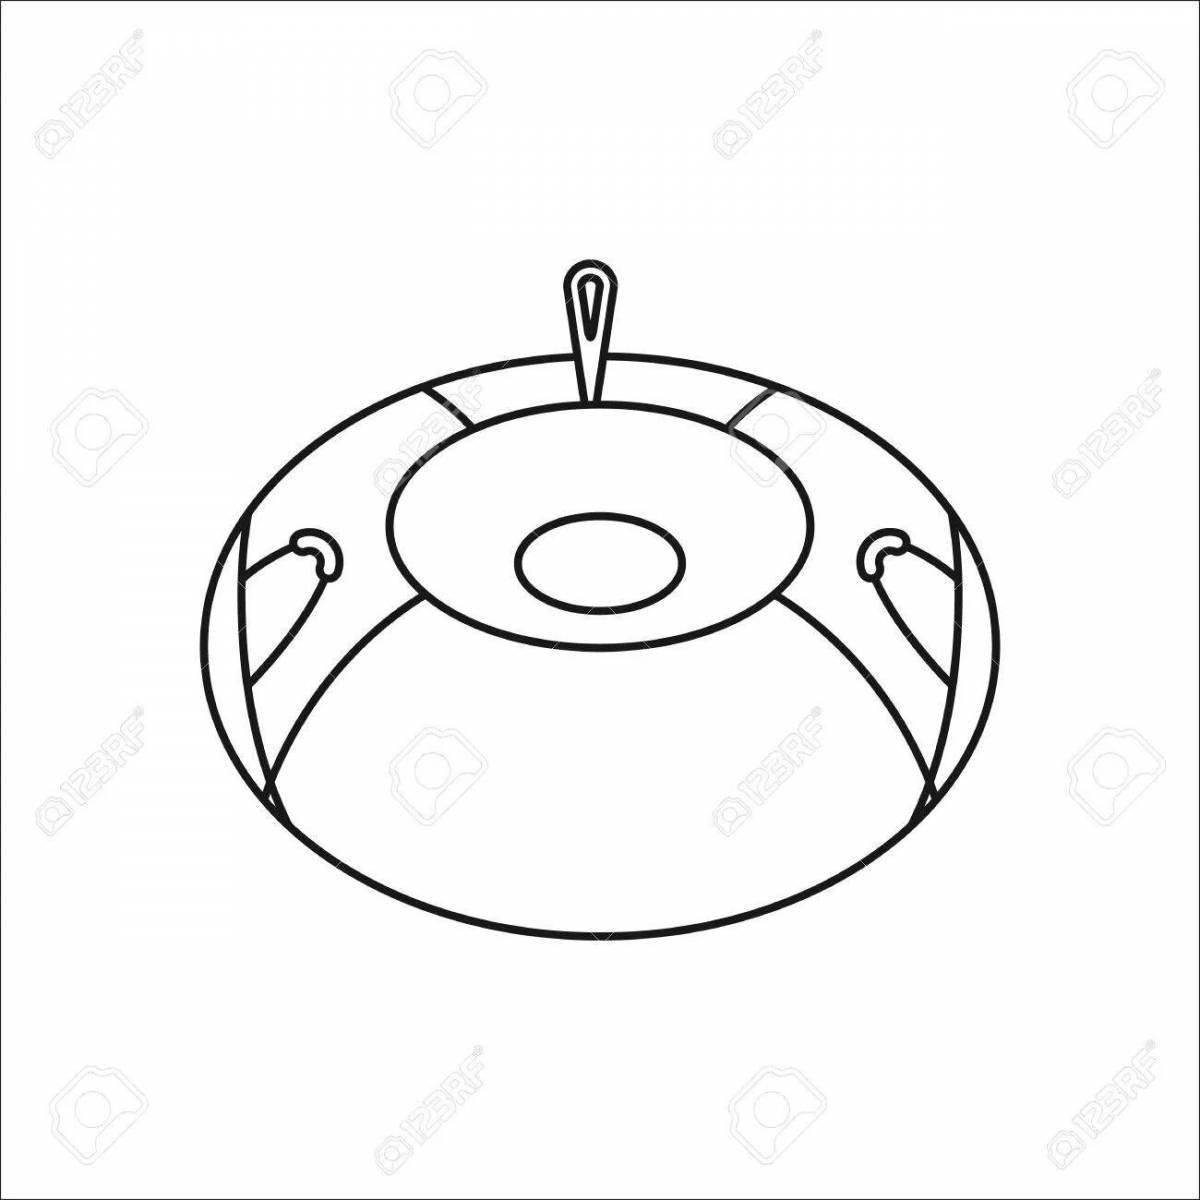 Living tube coloring page